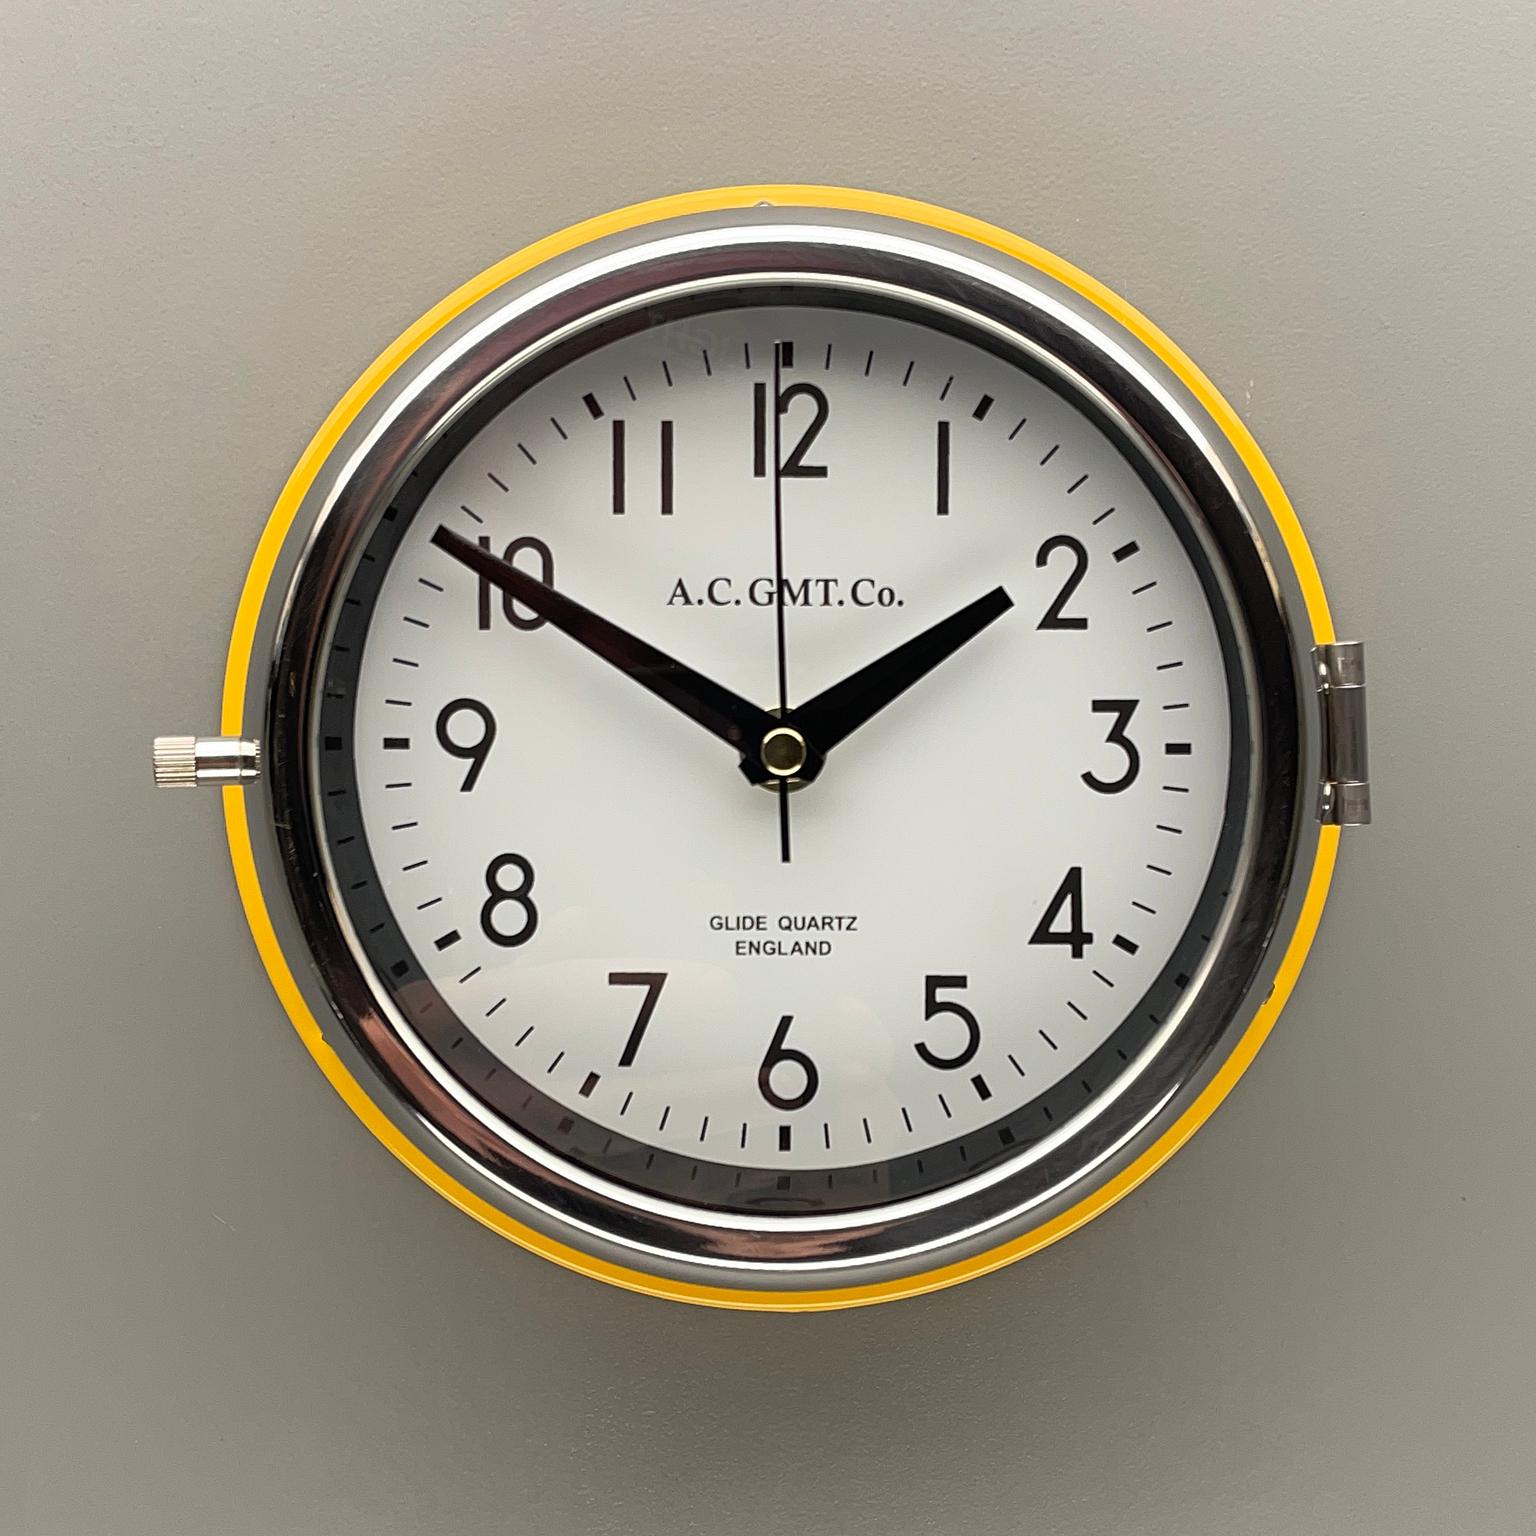 Quartz sweep seconds / non ticking wall clock finished in Yellow Pantone 13-0647 Illuminating.

Rescued from Industrial scrap yards and brought back to life in our UK workshop, our expert process allows us to create a high quality clock of luxury